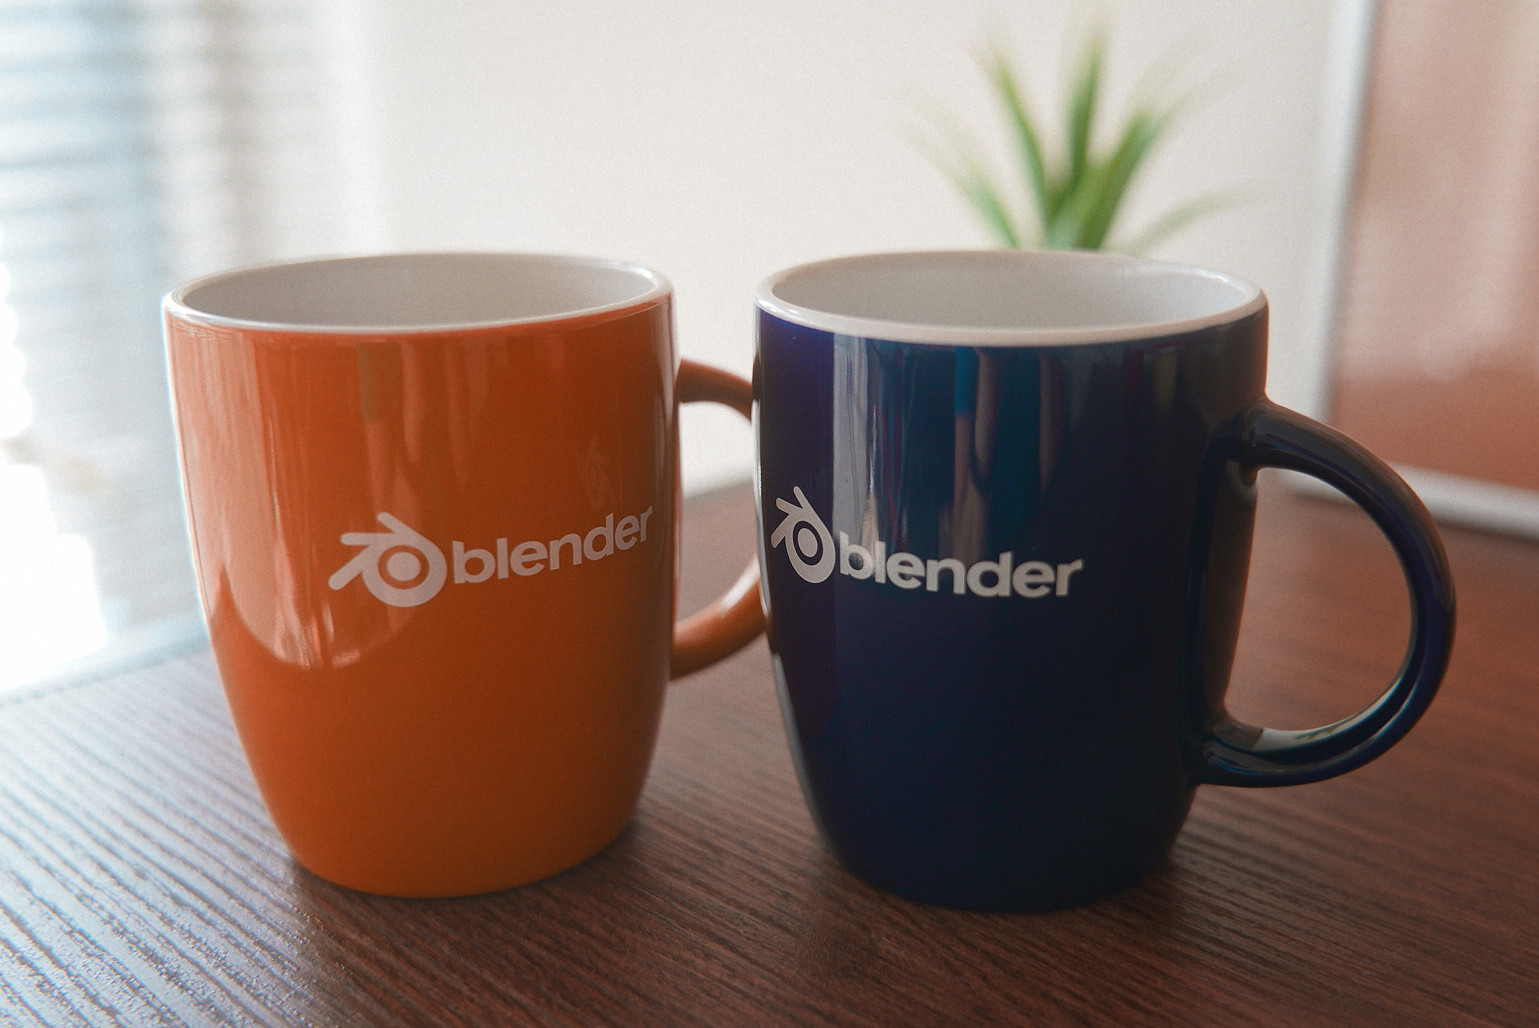 What is a blender cup and how does it differ from a regular cup